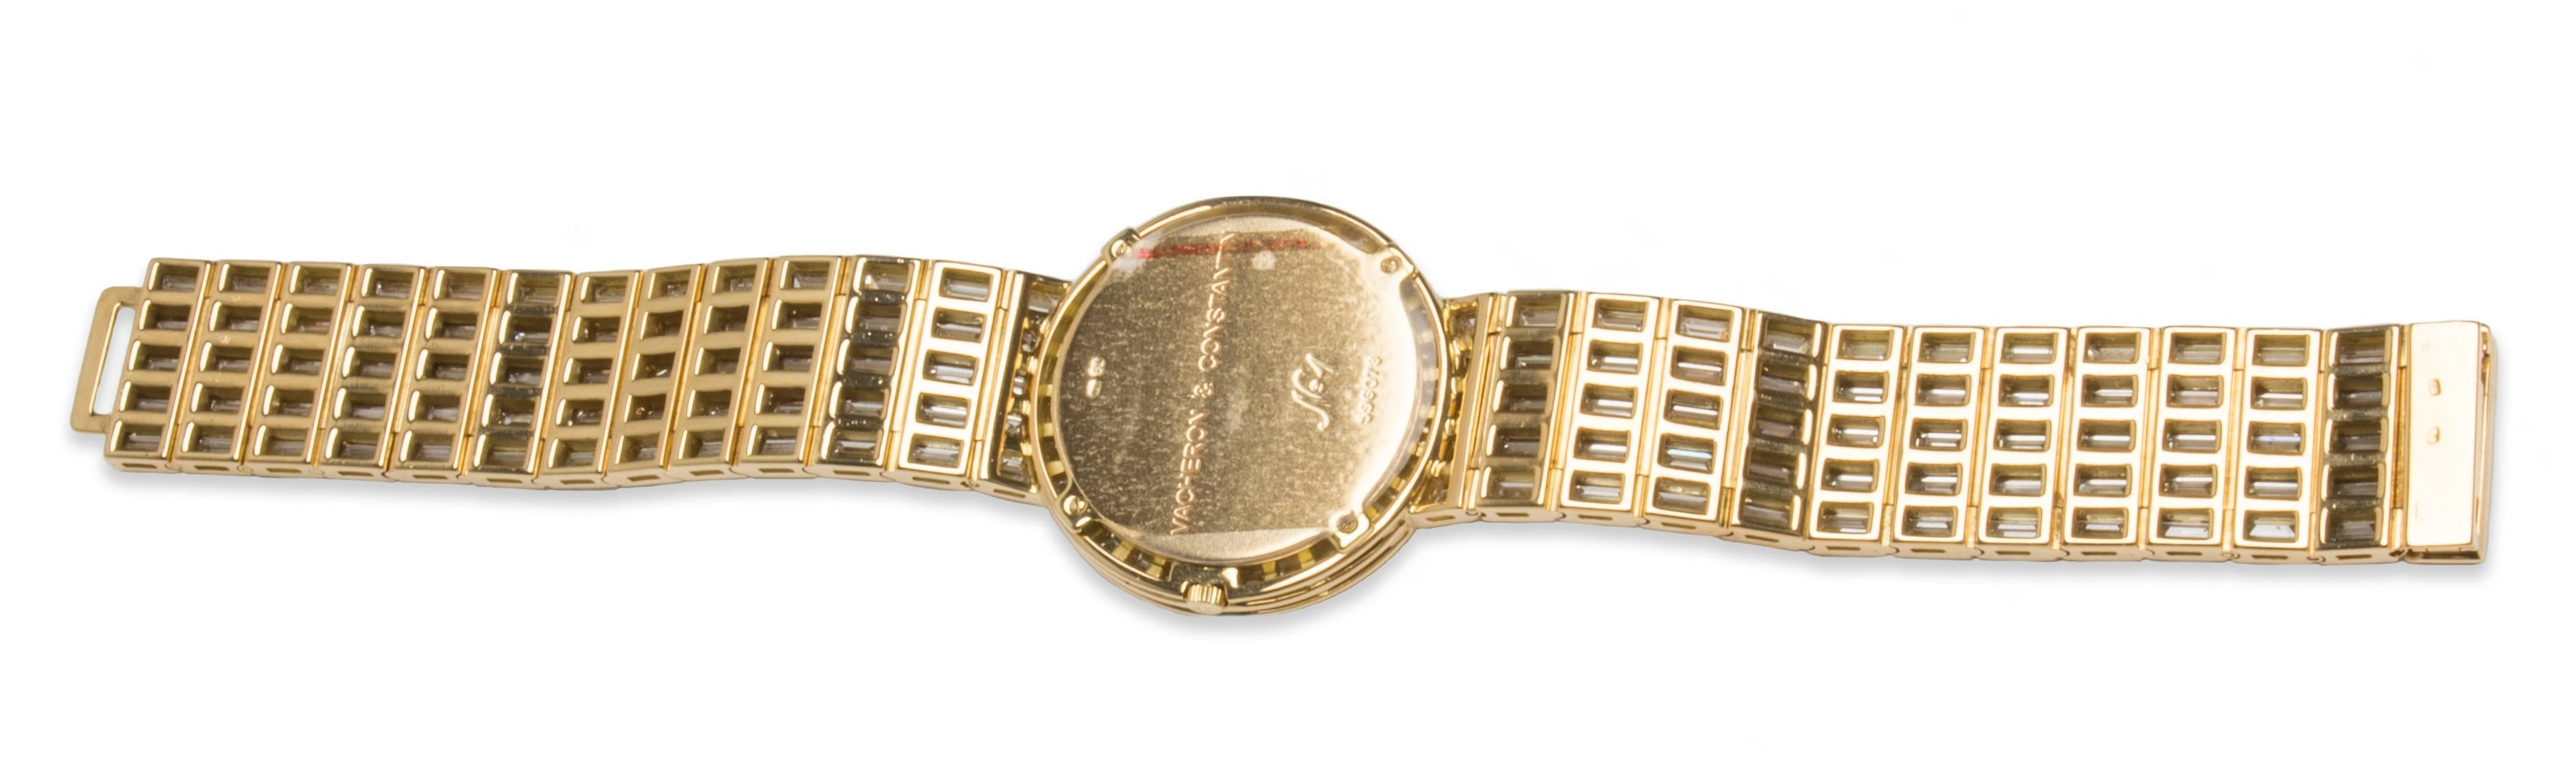 Vacheron Constantin Yellow Gold Diamond Kalla Pagode No 1 Wristwatch In Excellent Condition For Sale In Sunny Isles Beach, FL